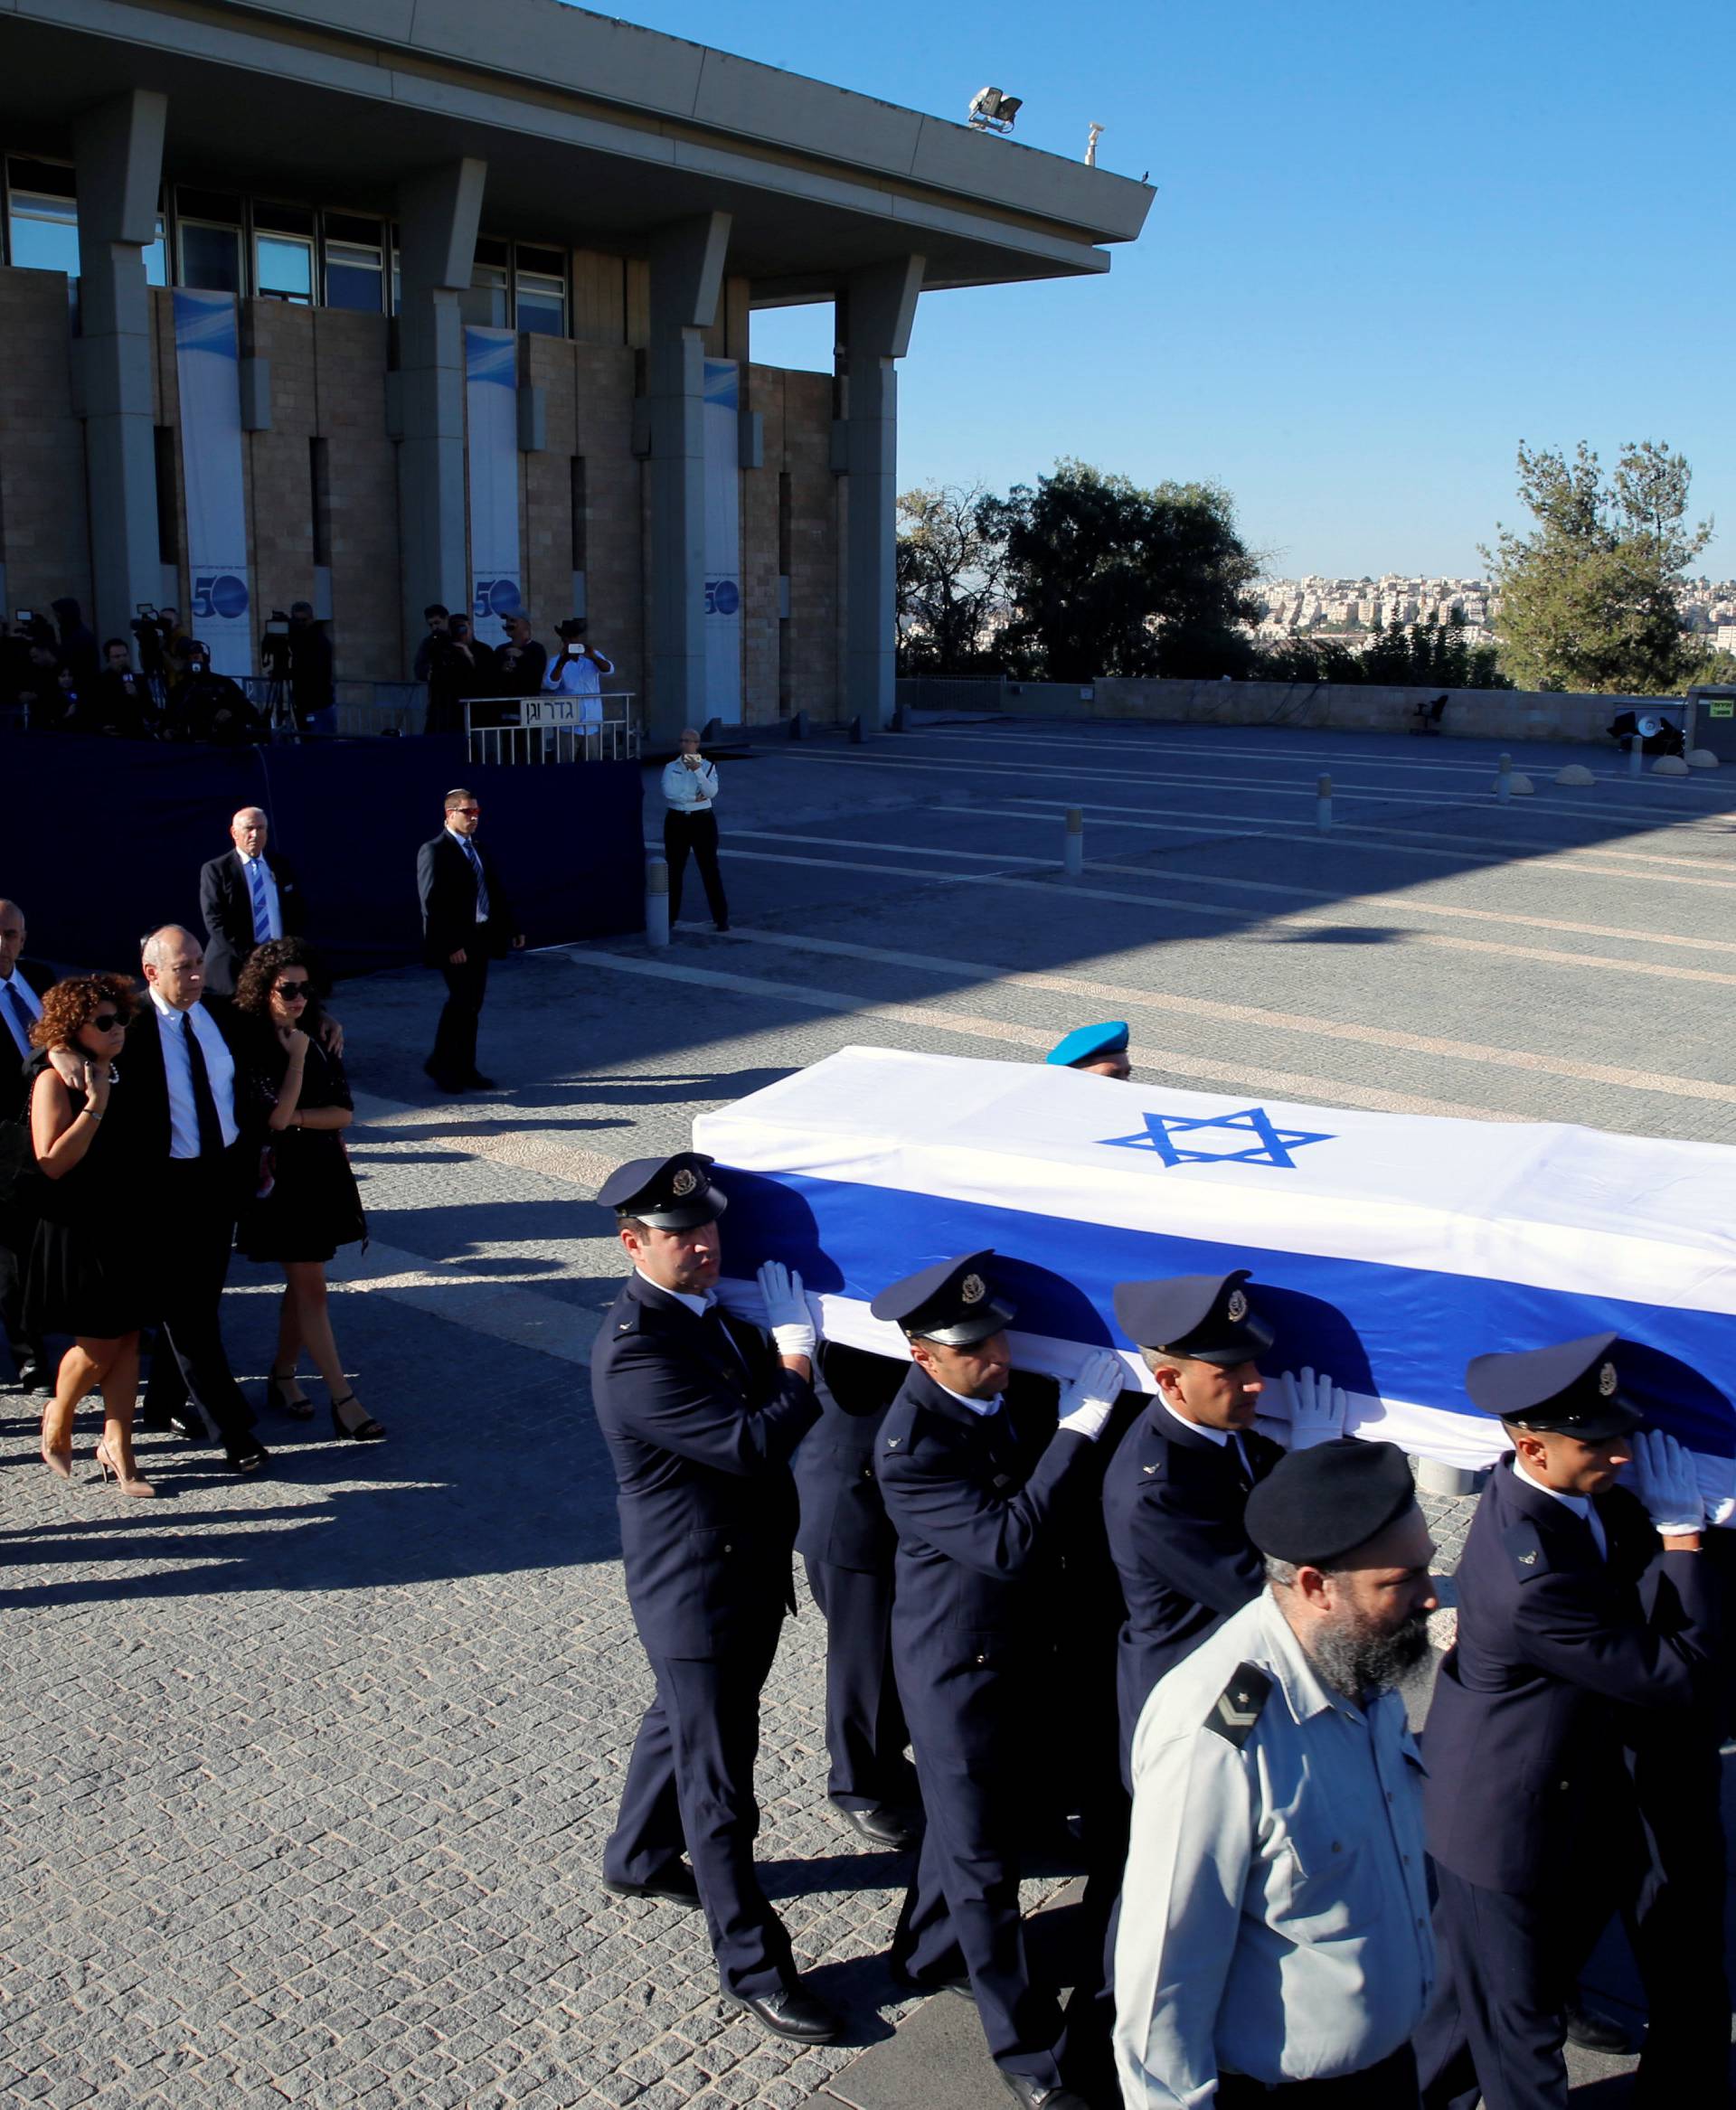 Family members of former Israeli President Shimon Peres walk behind his flag-draped coffin during a ceremony at the Knesset, the Israeli parliament, before it is transported to Mount Herzl Cemetery ahead of the funeral in Jerusalem 